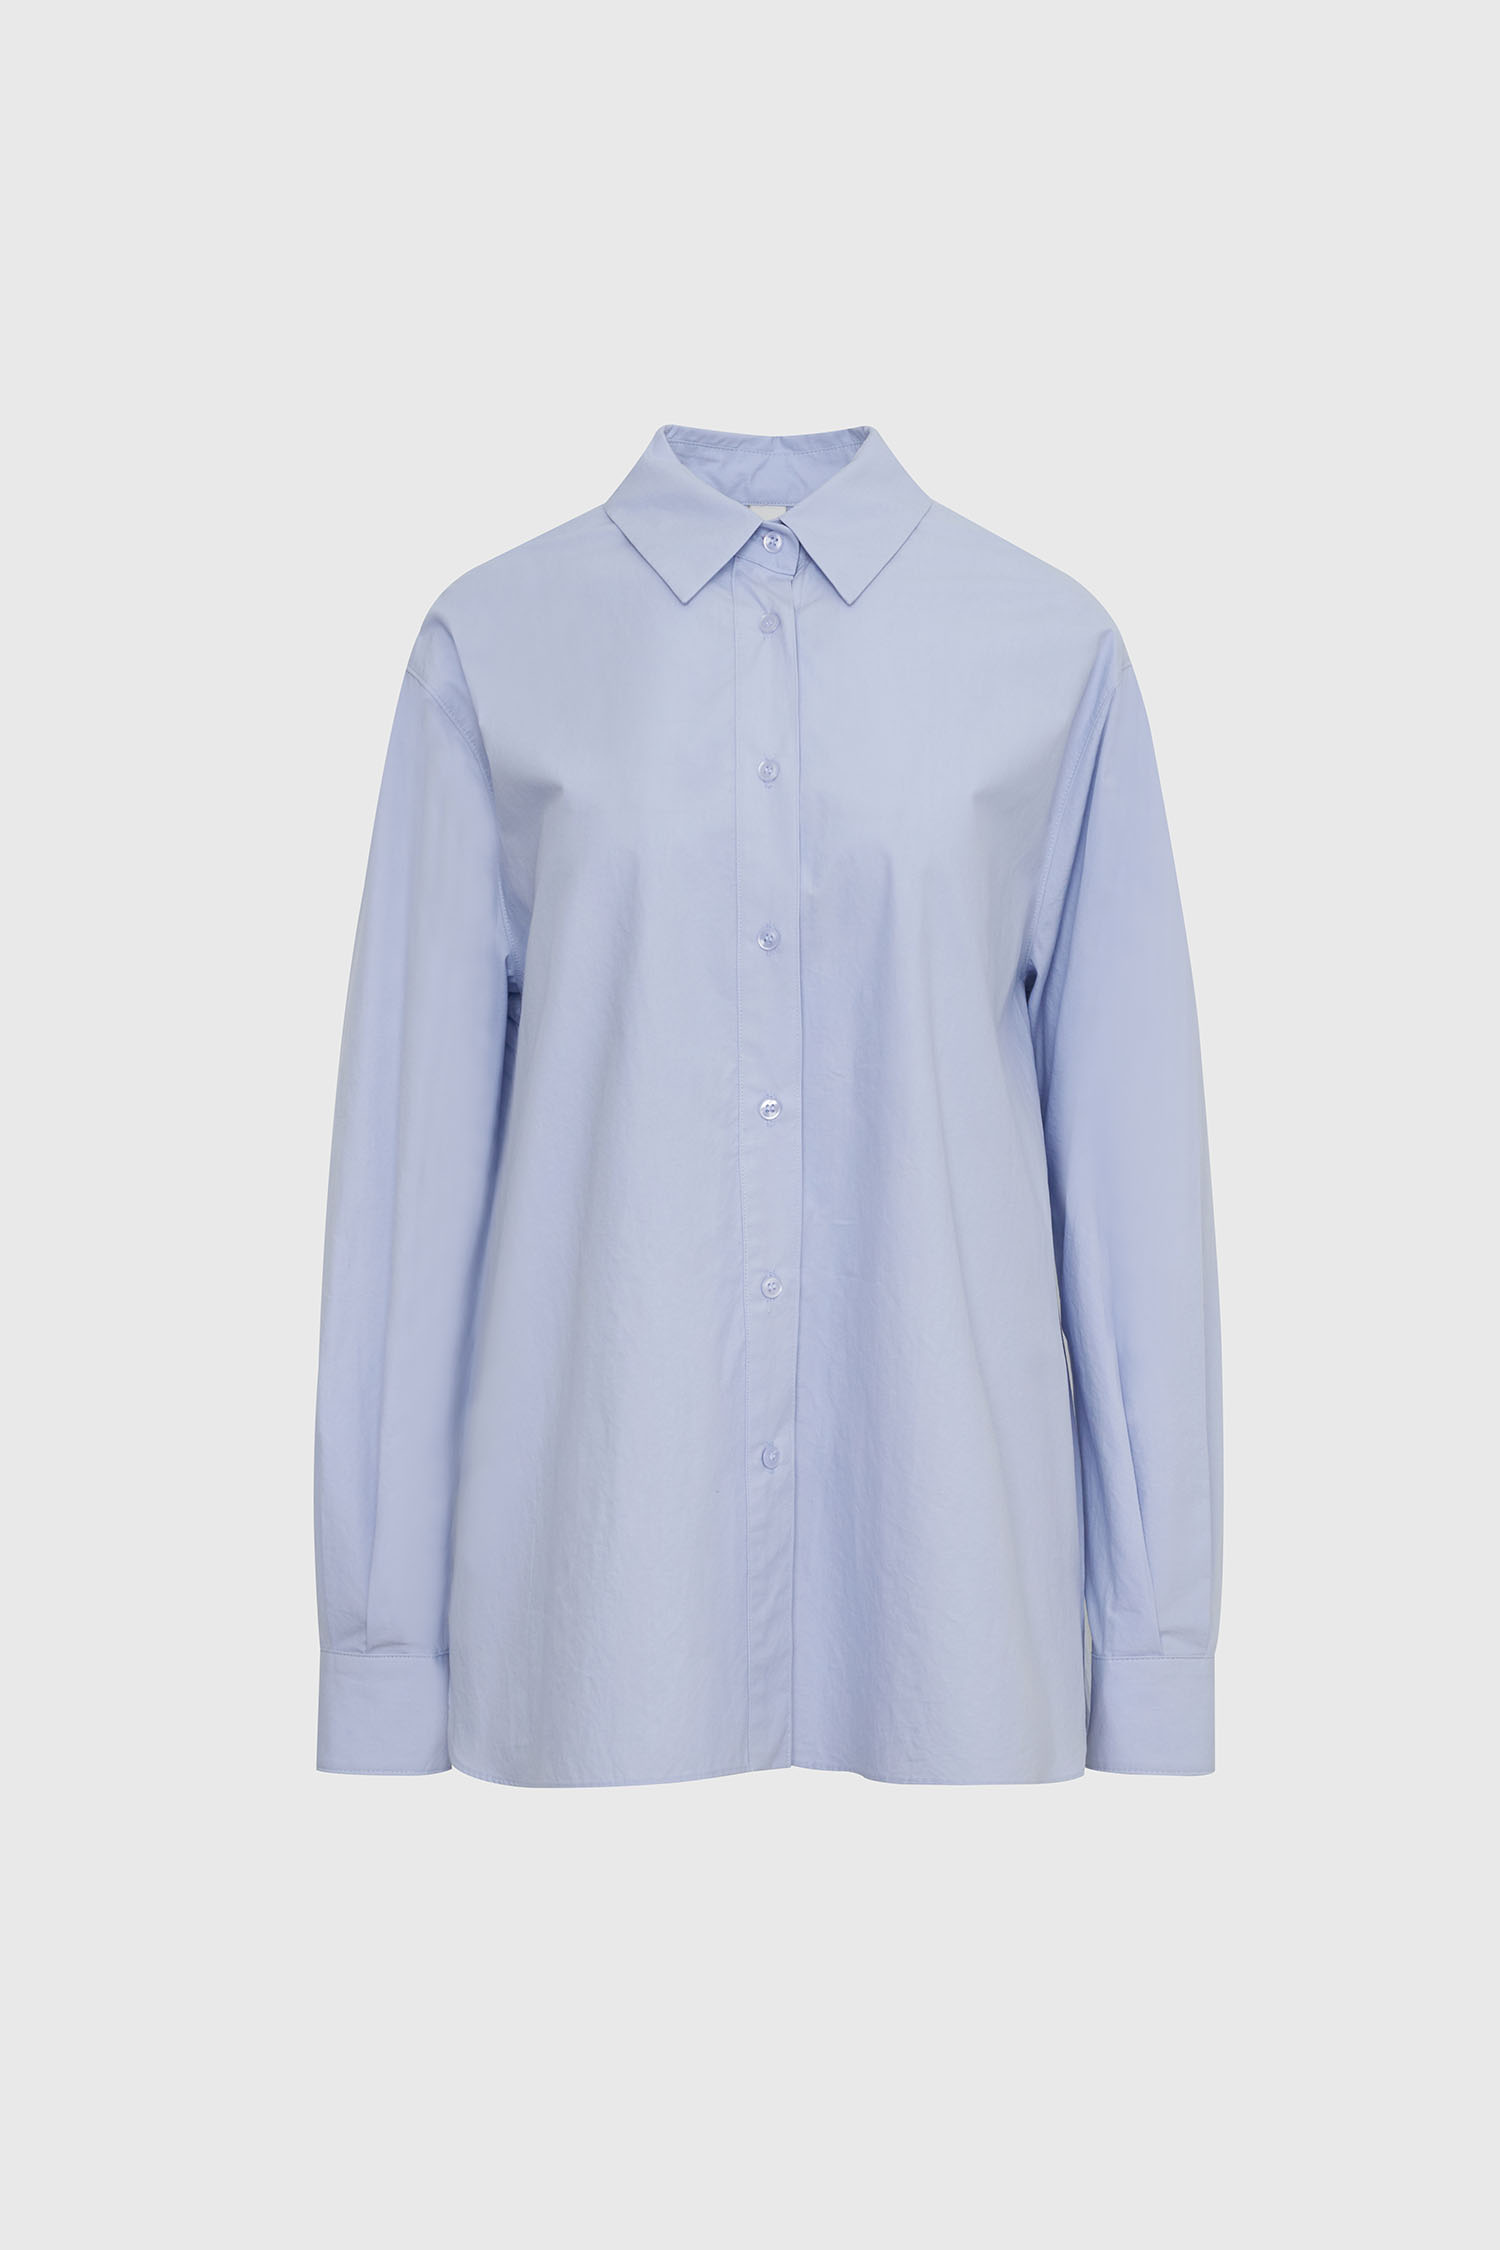 AD sailboat embroidery loose fit shirt - blue